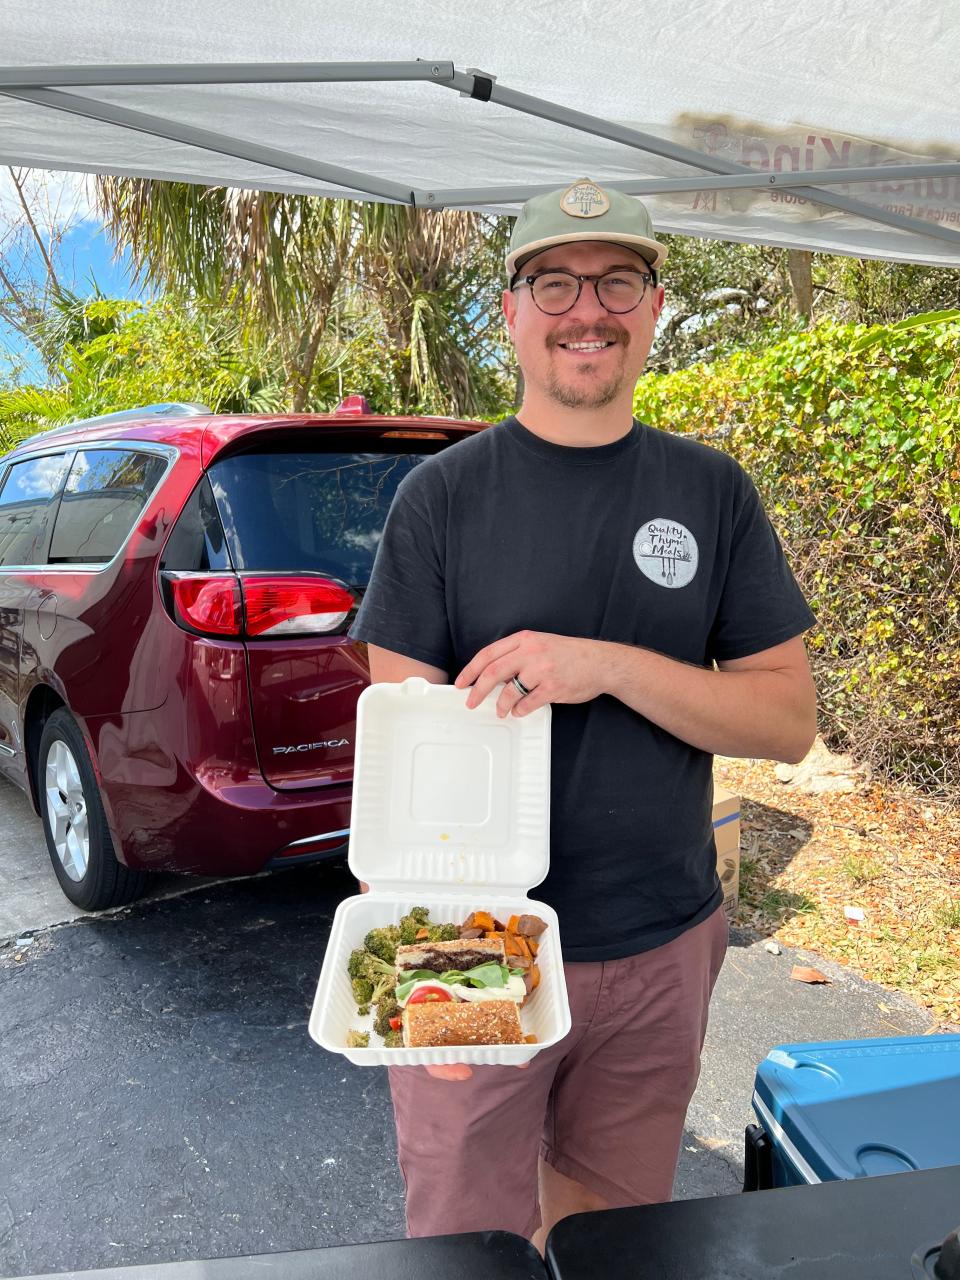 Chef-owner Patrick Beraduce of Quality Thyme Meals catering company handed out free food at Ceremony Brewing in Bonita Springs after Hurricane Ian.